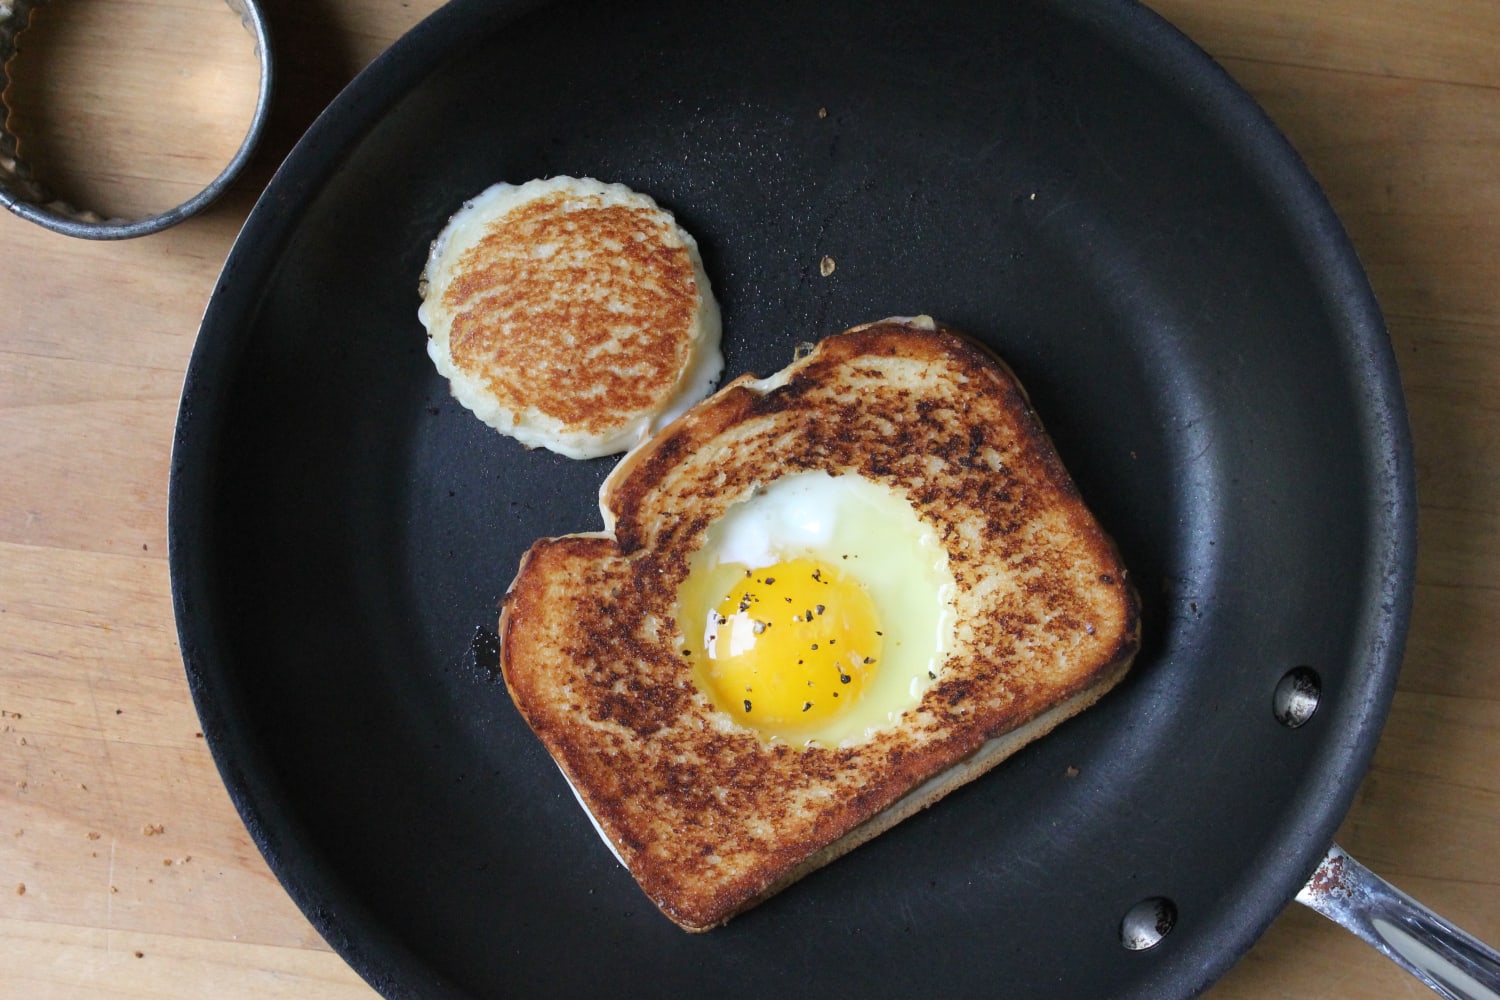 https://media-cldnry.s-nbcnews.com/image/upload/newscms/2016_02/935246/03_grilled_cheese_egg-in-a-hole.jpg